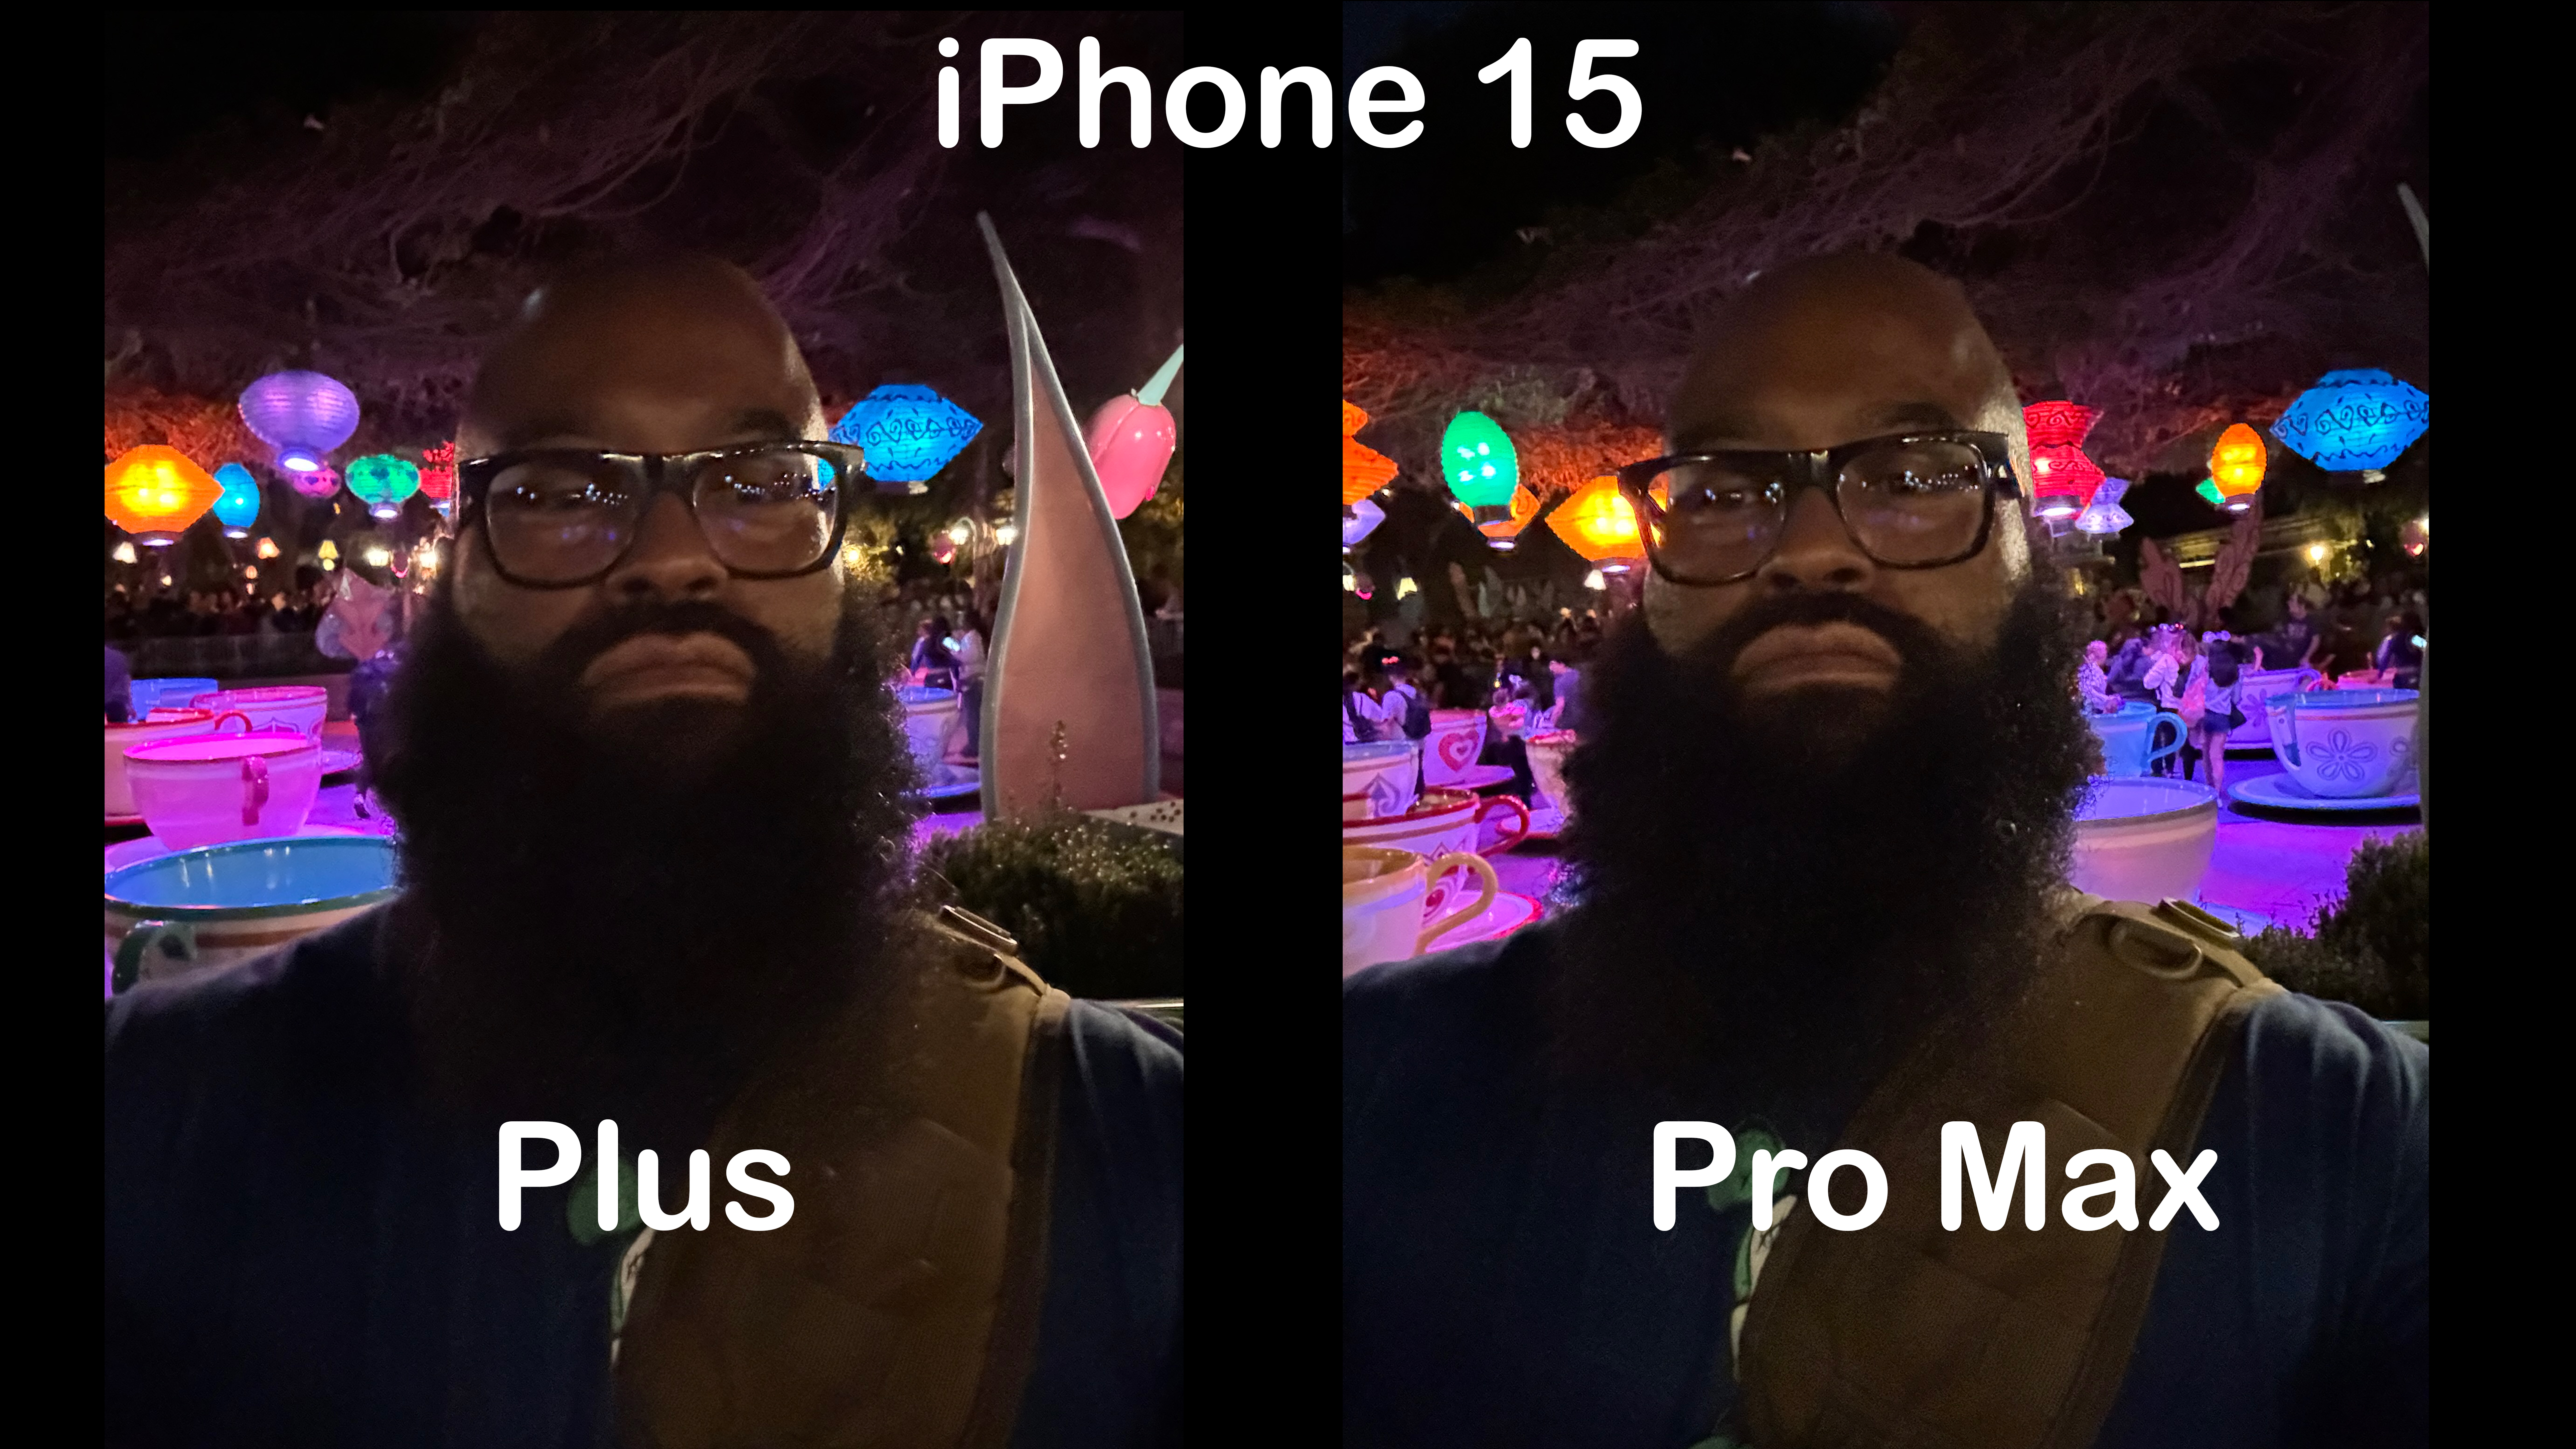 photo comparison between the iphone 15 plus and iphone 15 pro max